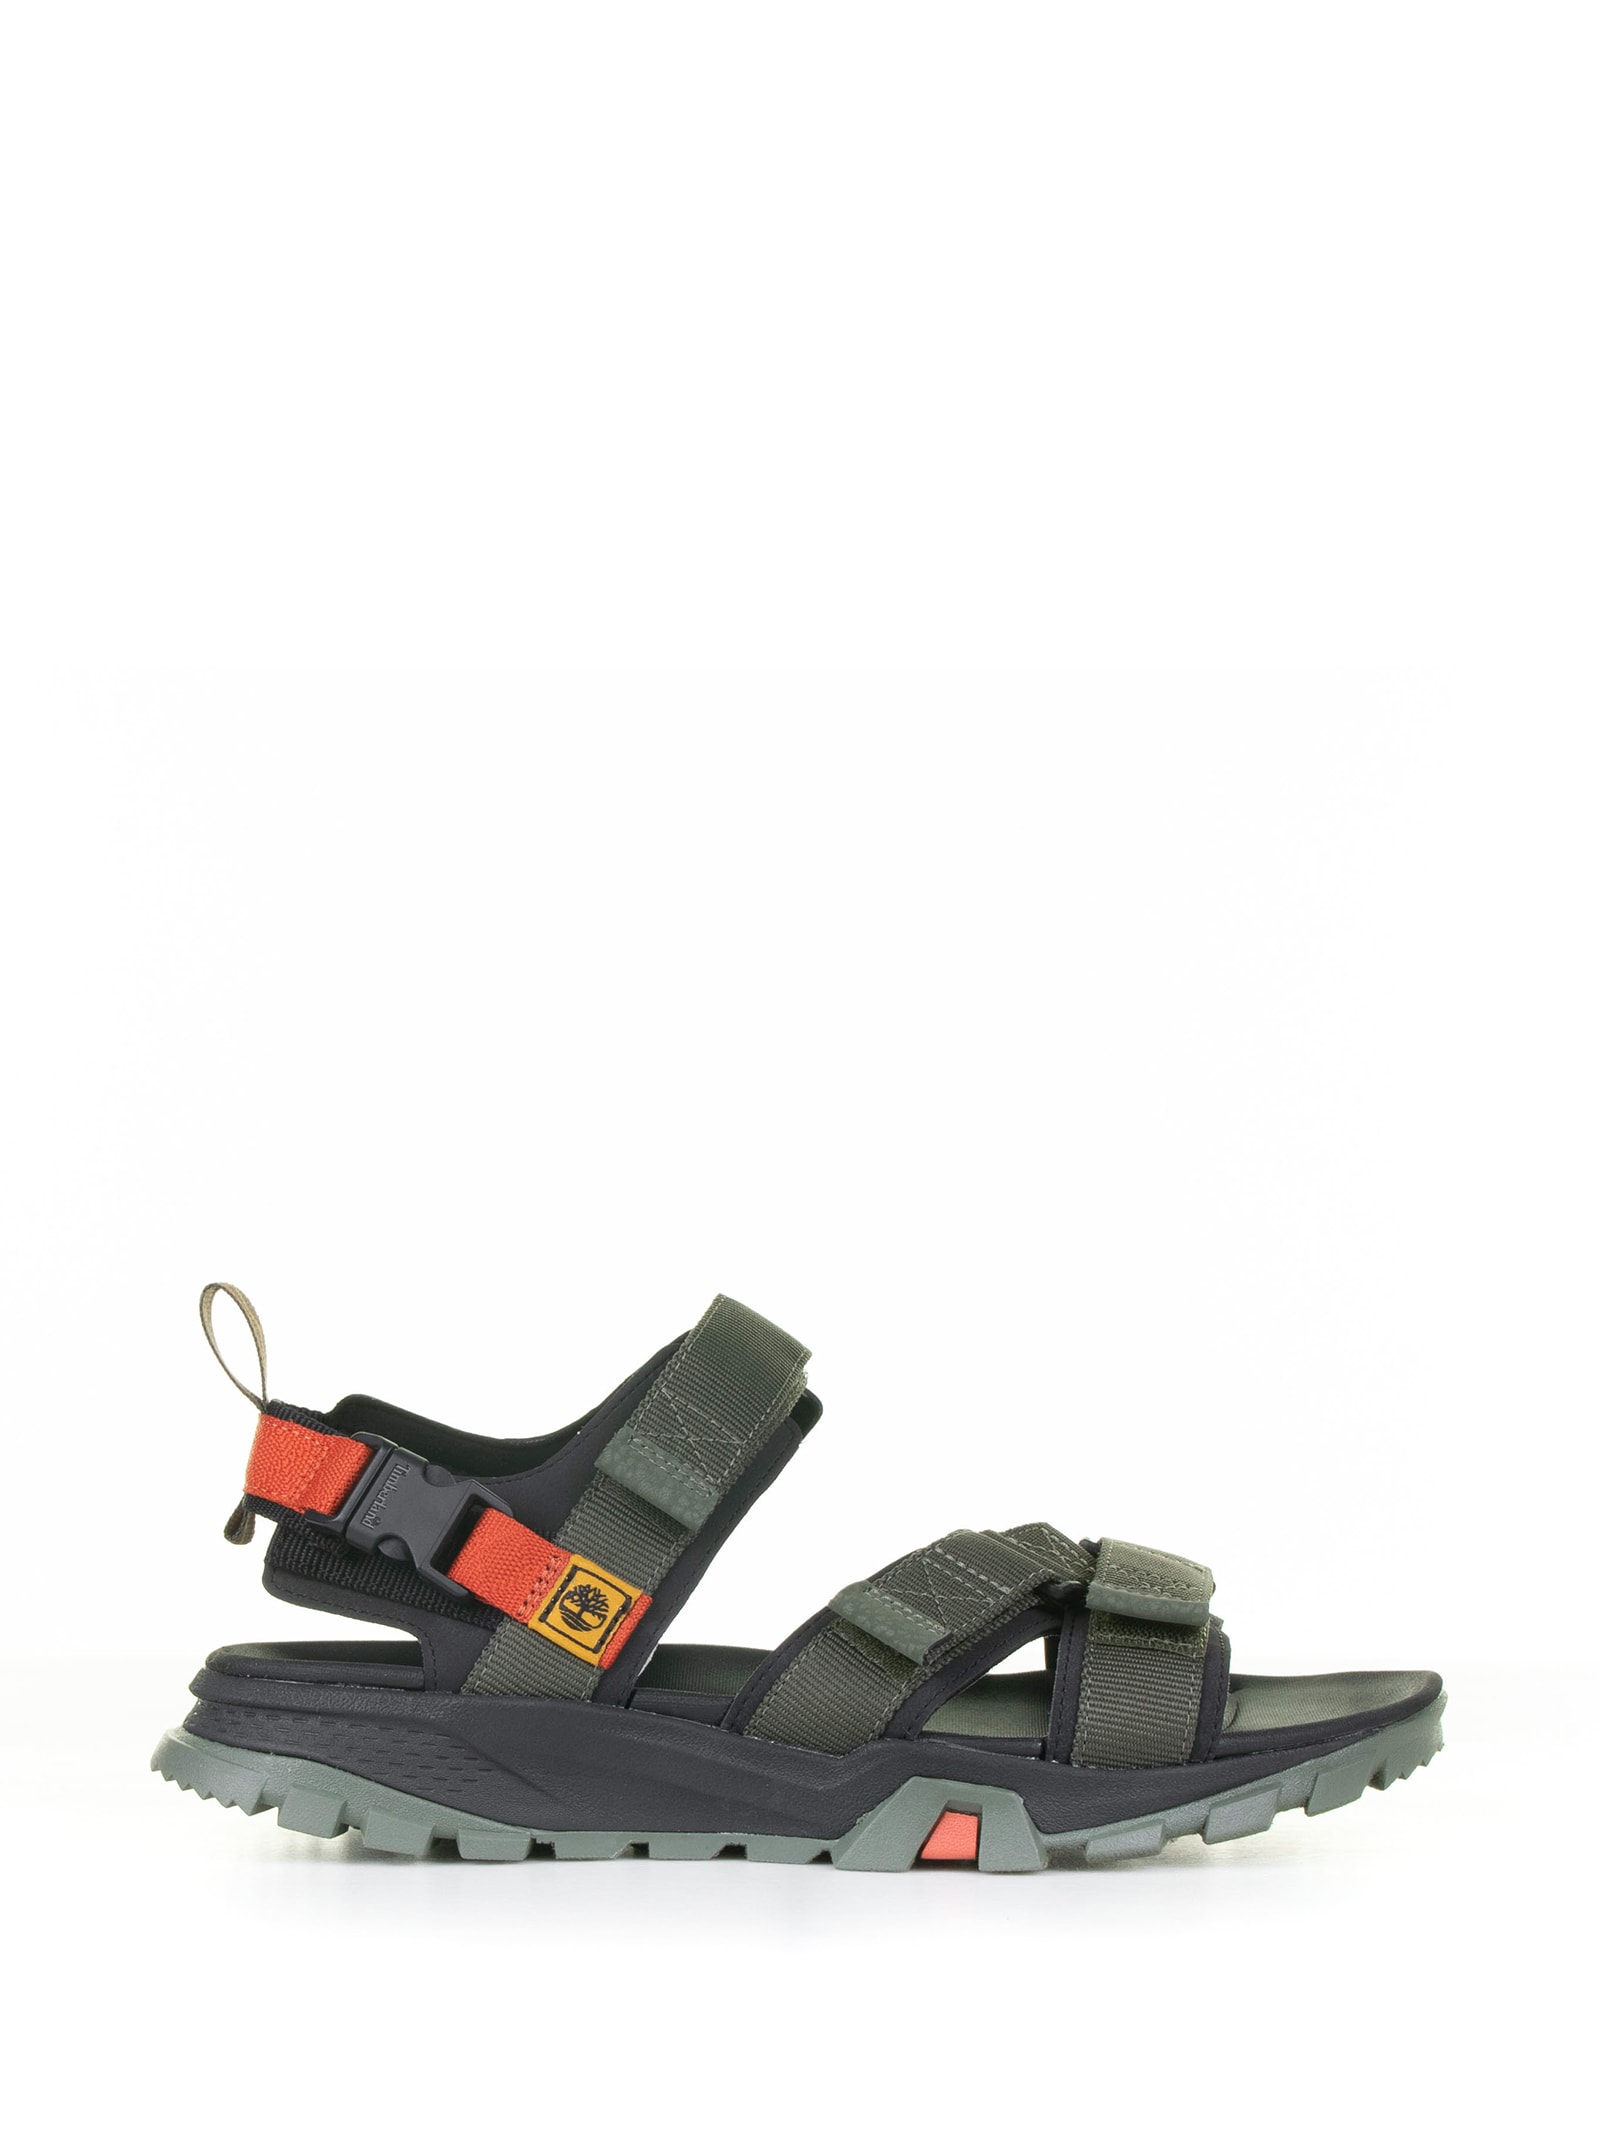 Sandals With Adjustable Velcro Straps